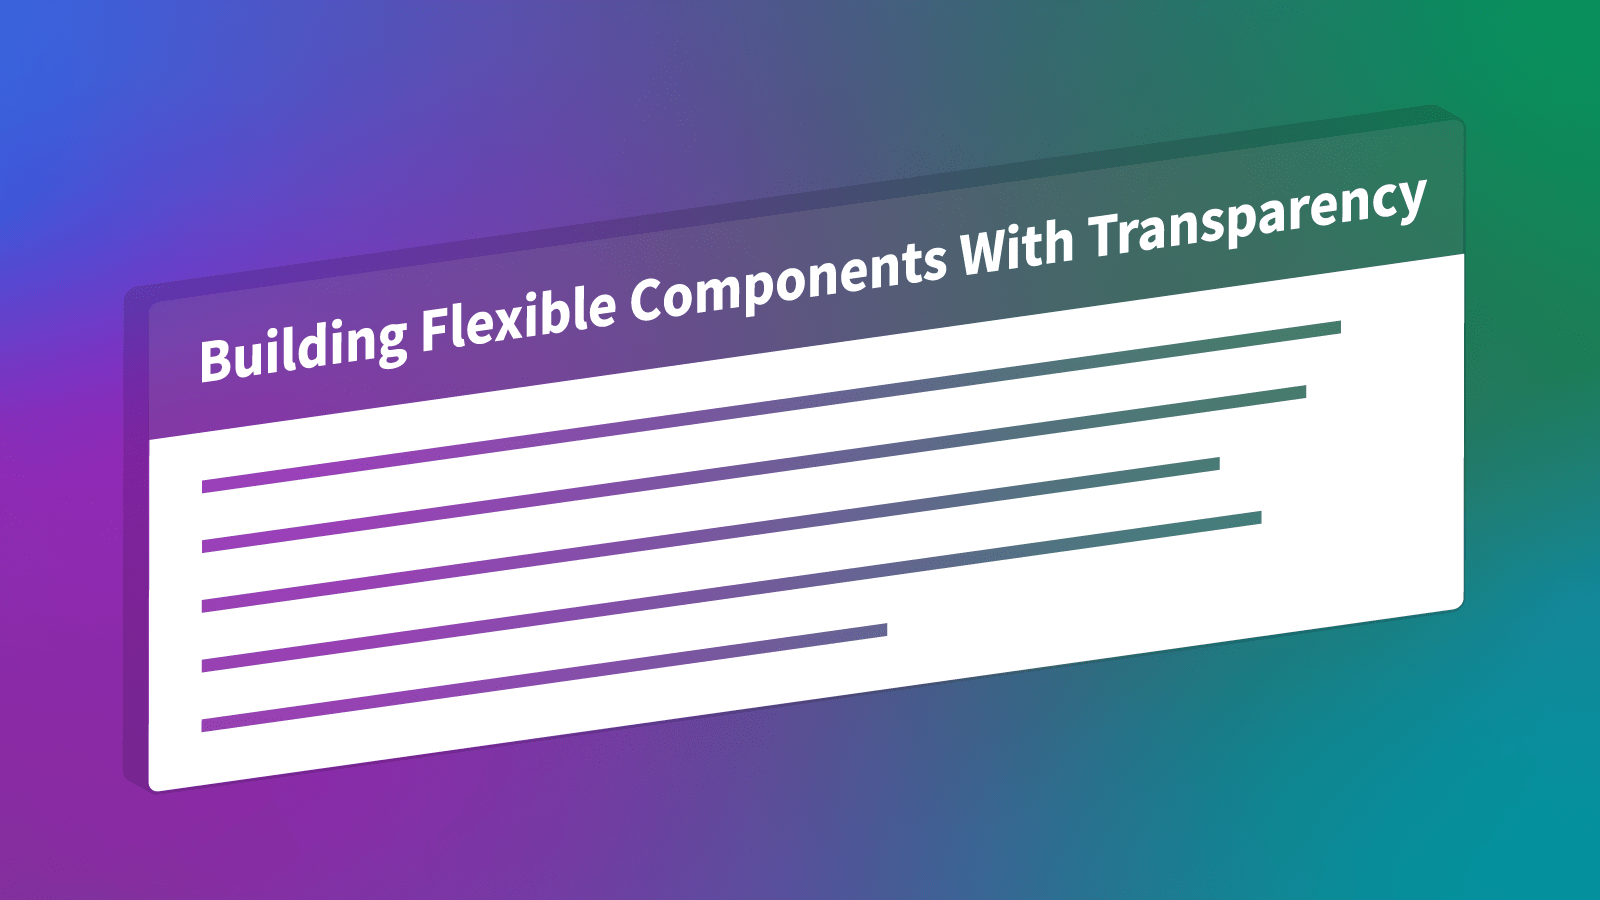 A panel component superimposed in 3D over a colorful gradient background. The panel header has a transparent background and reads "Building Flexible Components With Transparency". The panel body has a white background. Lines representing text are cut through the background allowing you to see the gradient below.